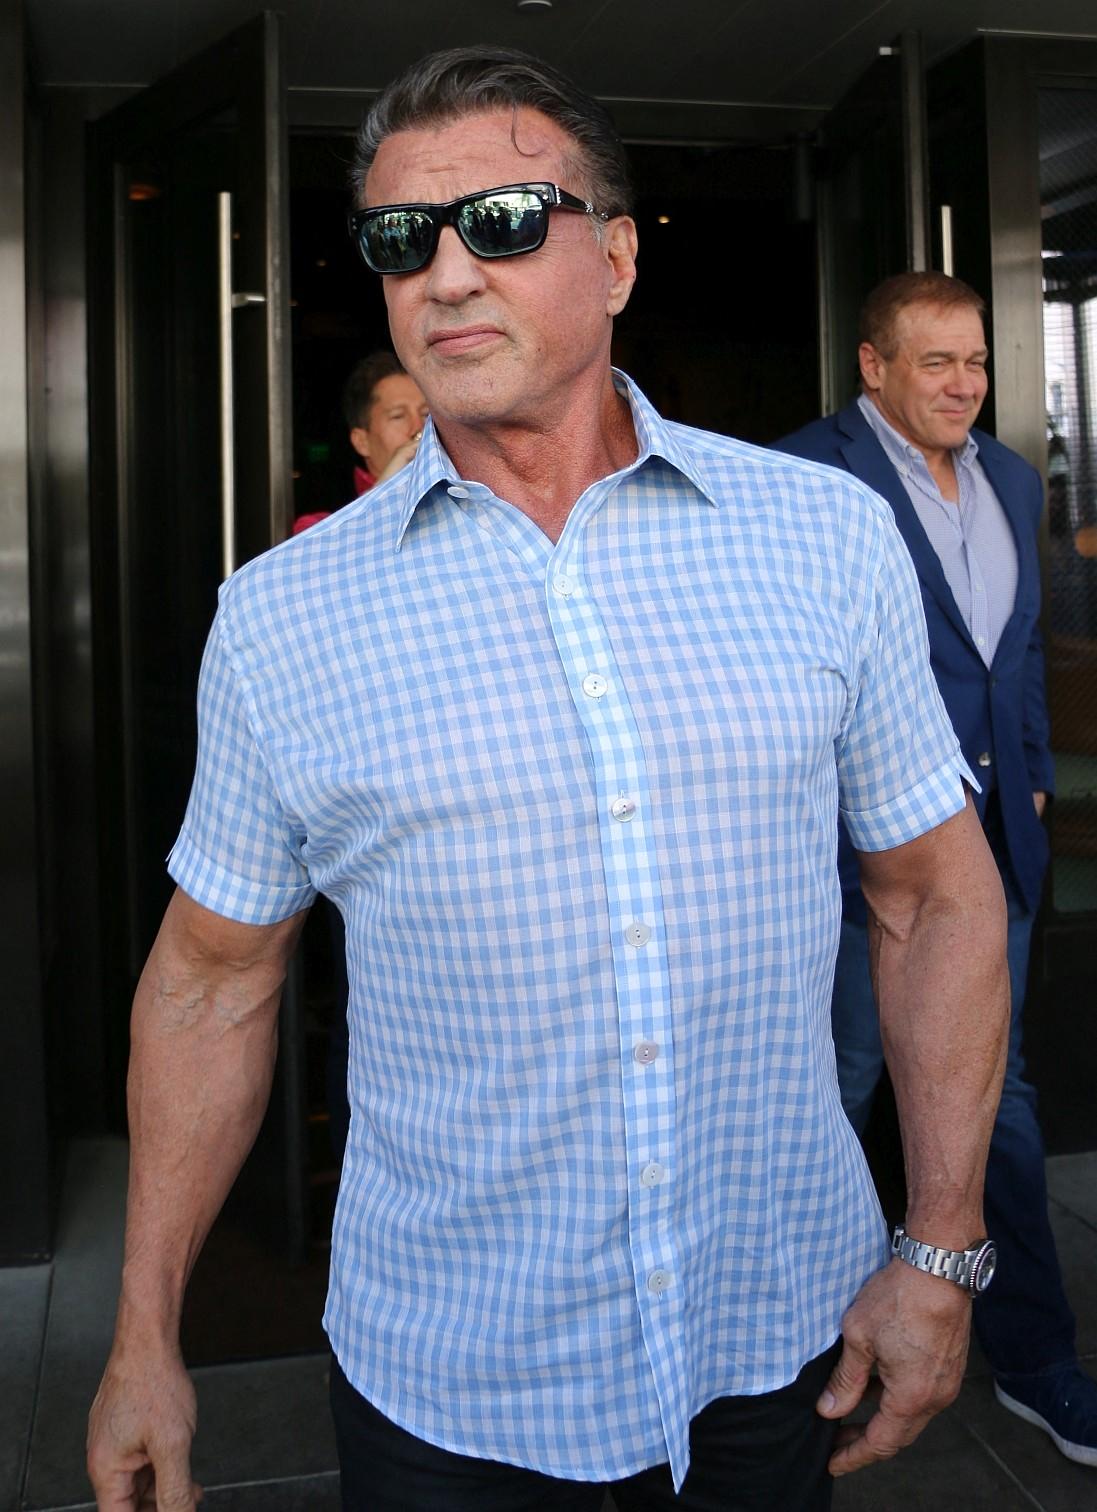 Sylvester Stallone seen leaving lunch after dining with Dolph Lundgren